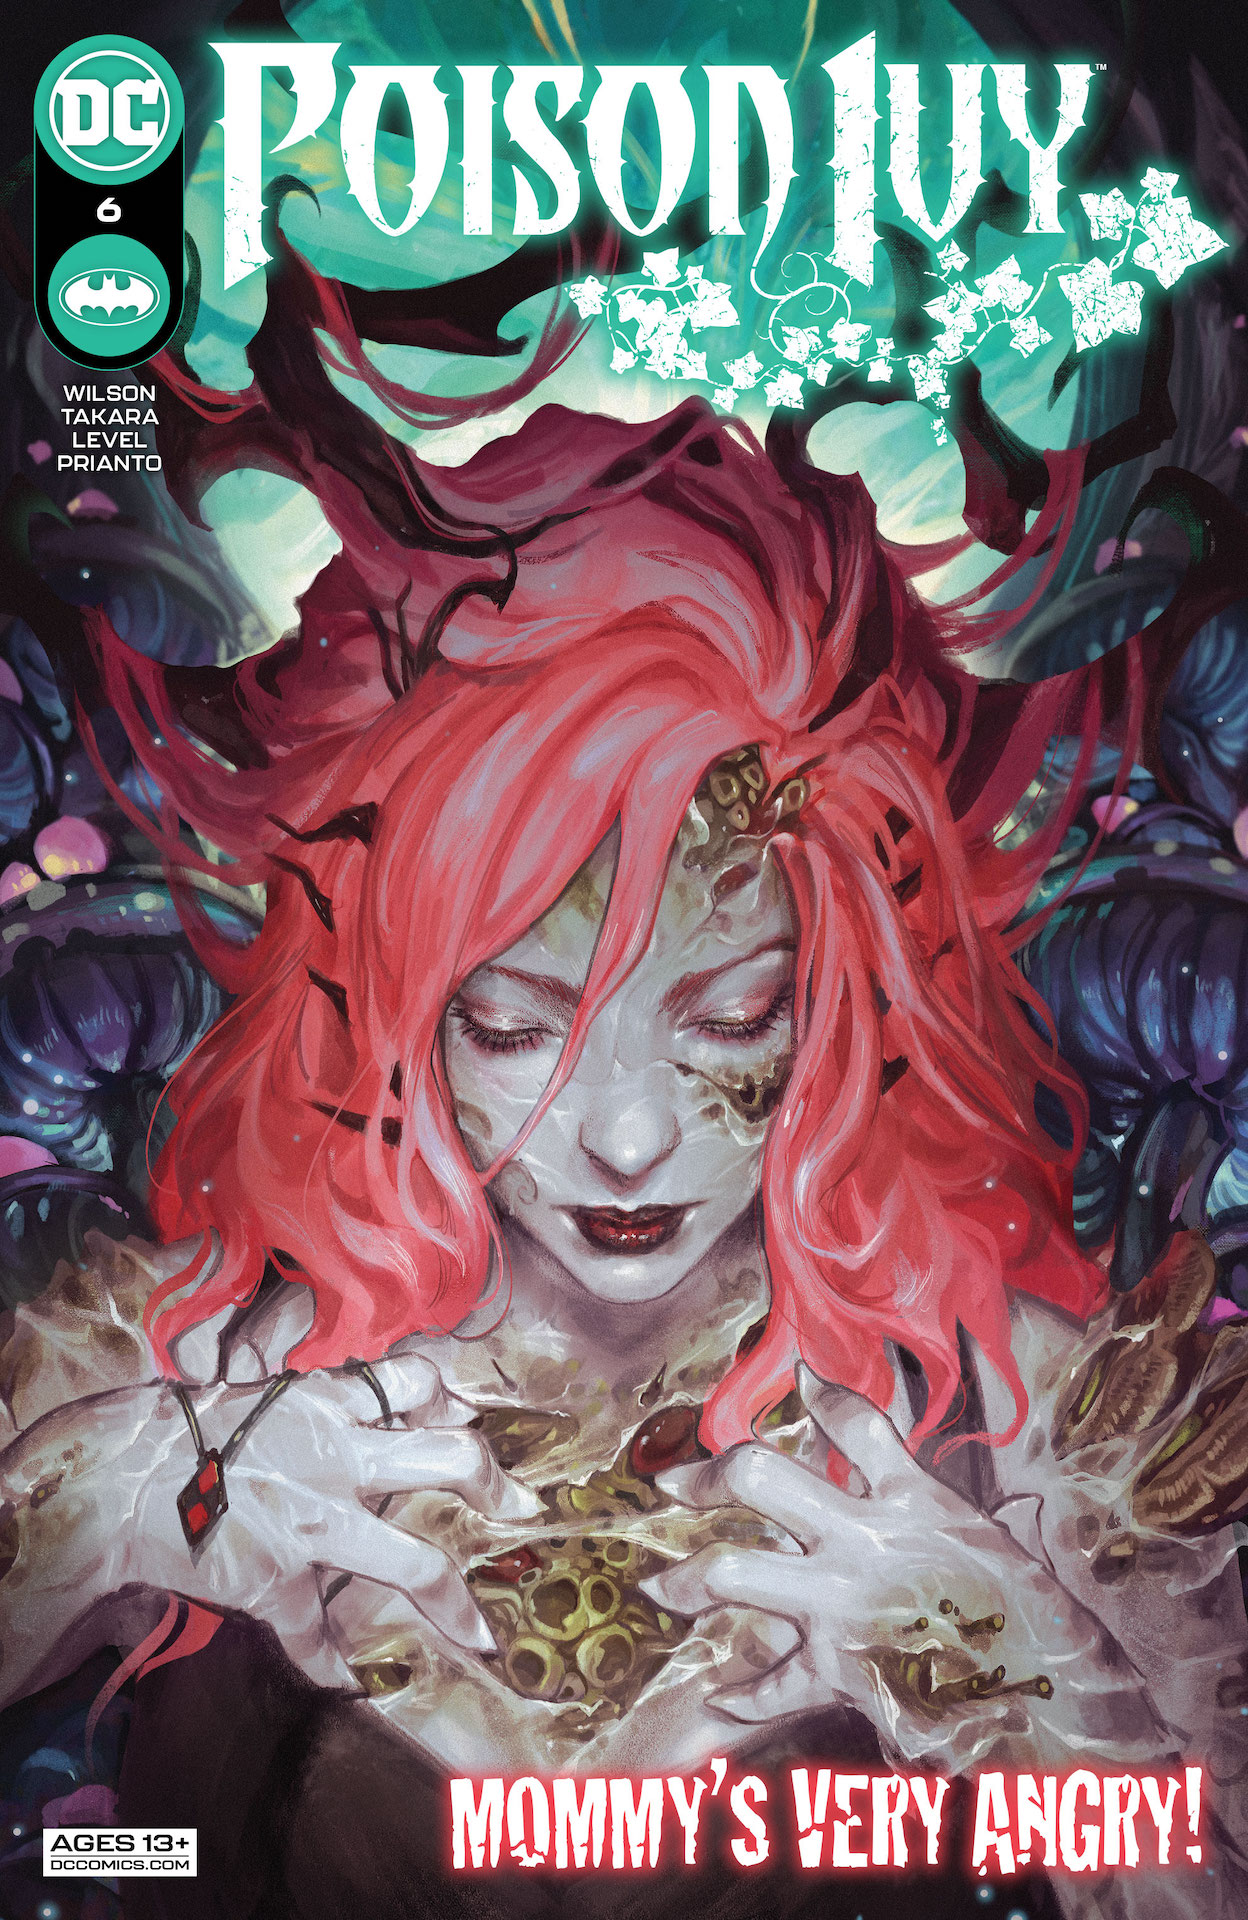 DC Preview: Poison Ivy #6